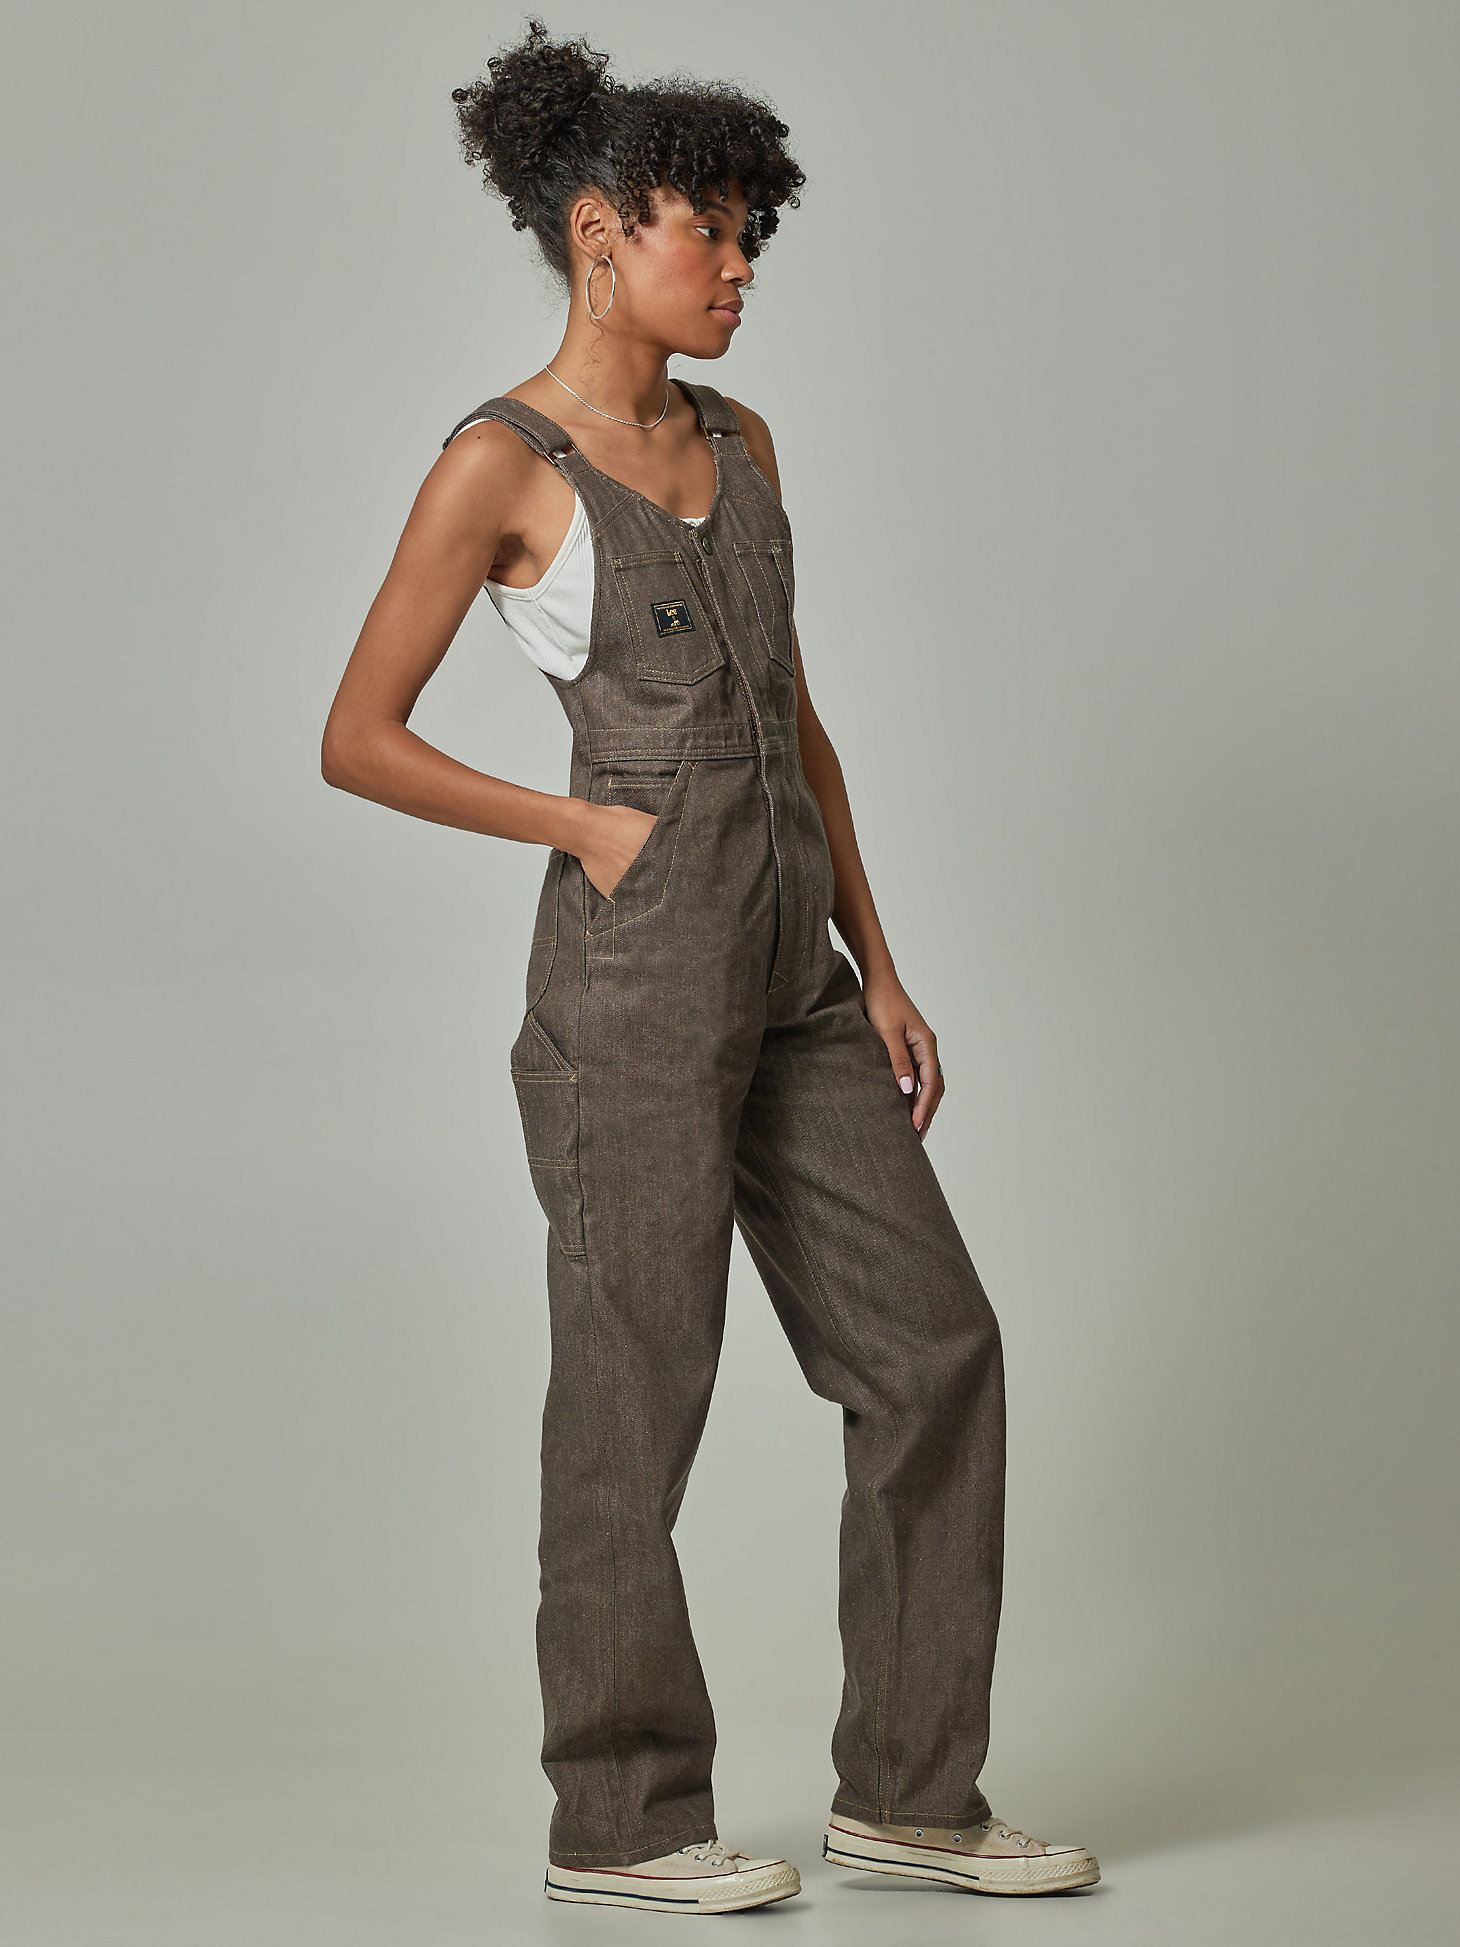 Lee® x The Brooklyn Circus® Whizit Overall in Brown alternative view 2